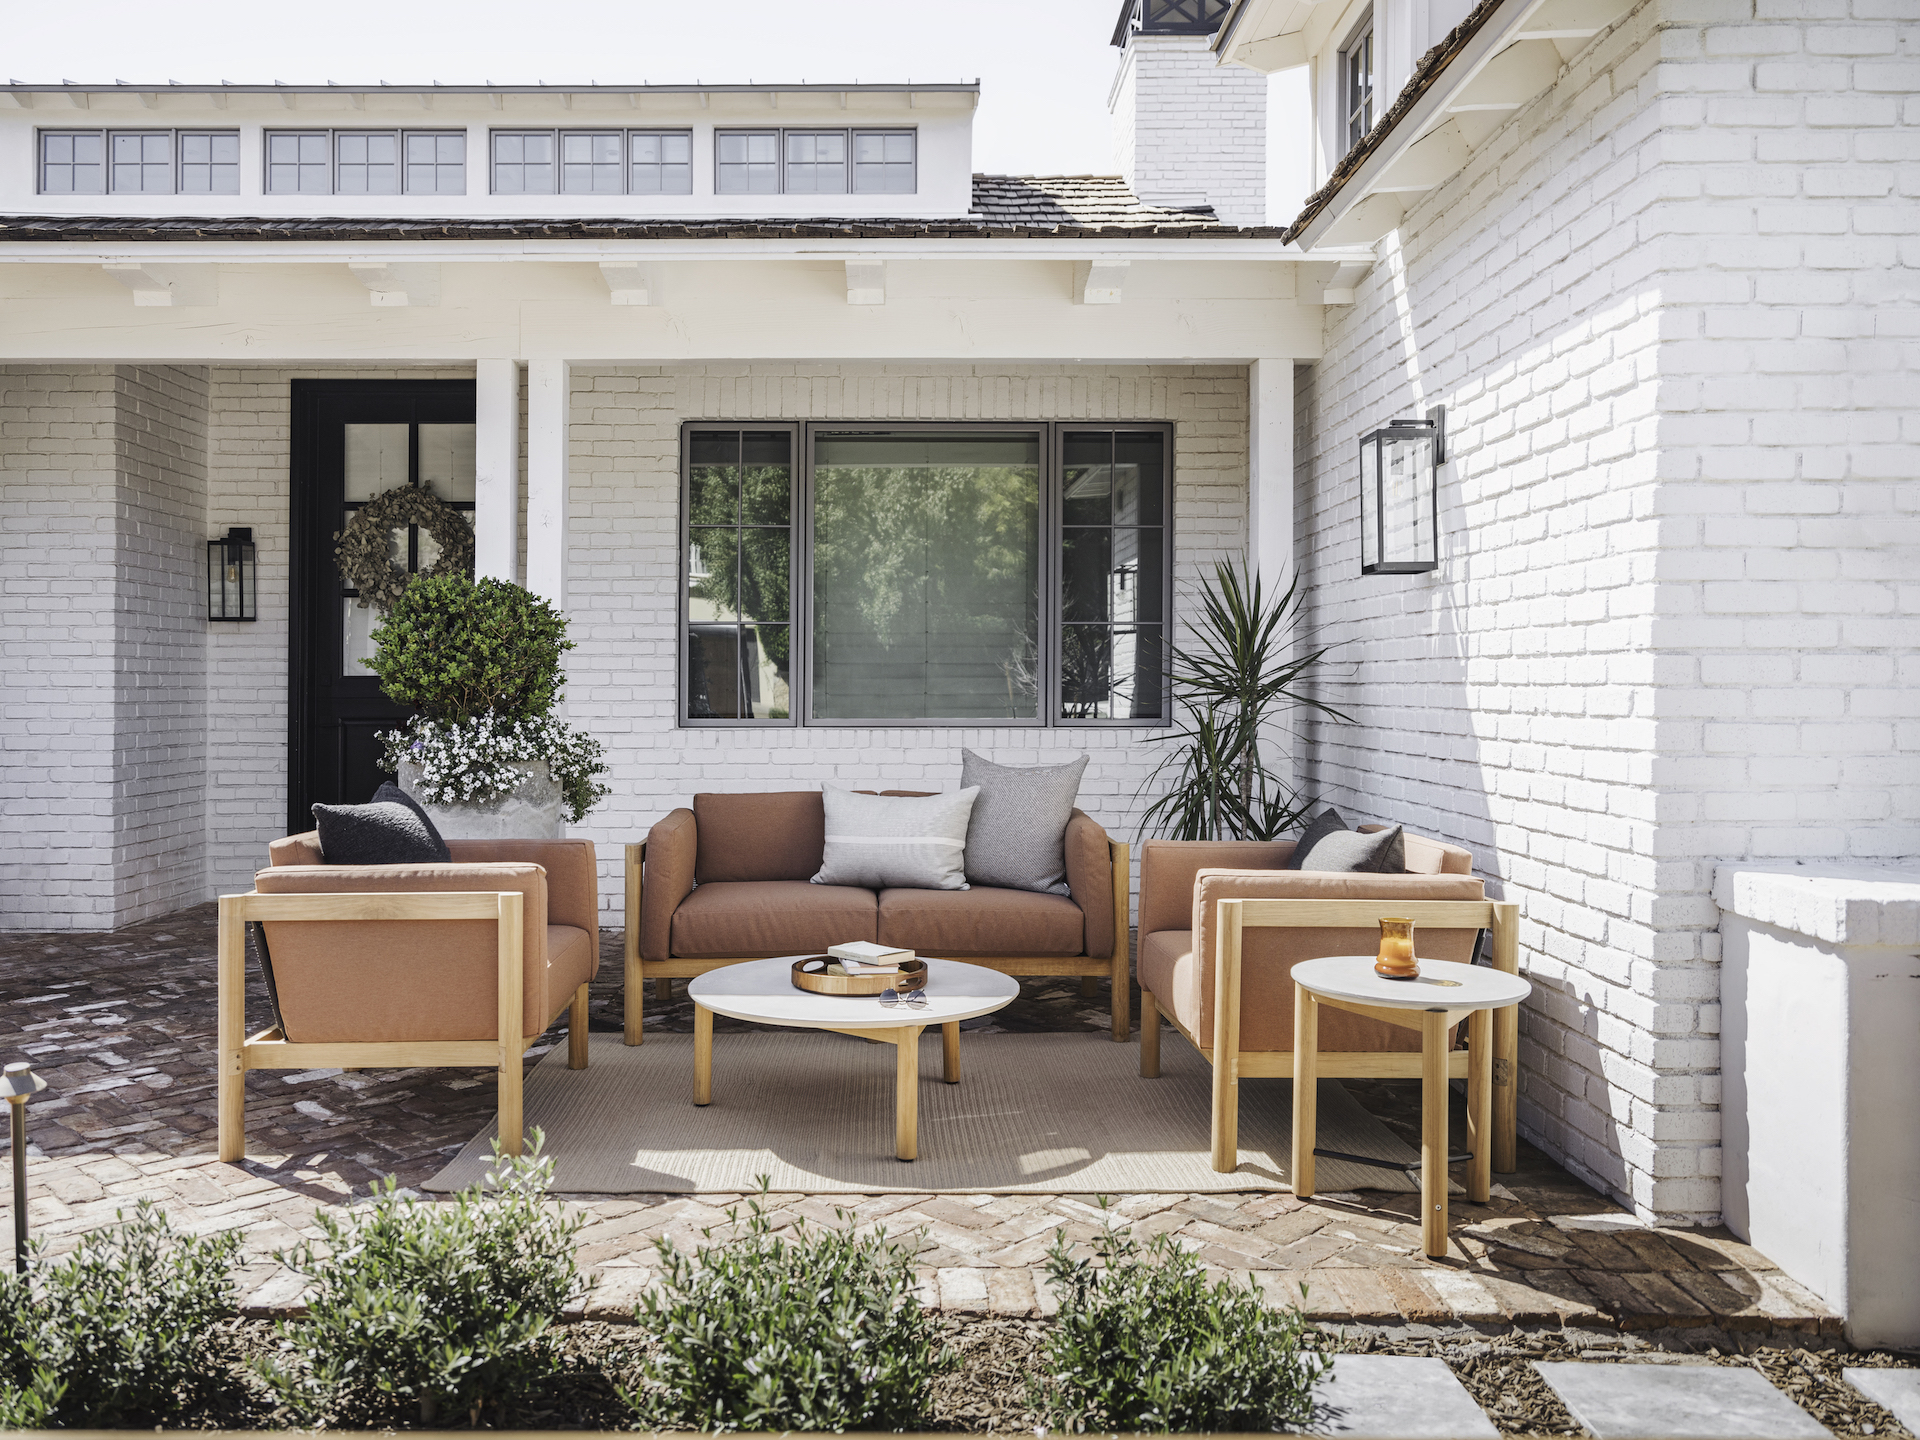 Customers using Yardzen’s all-online design platform will have access to Neighbor’s line of outdoor seating, dining furniture and decor in their custom designs